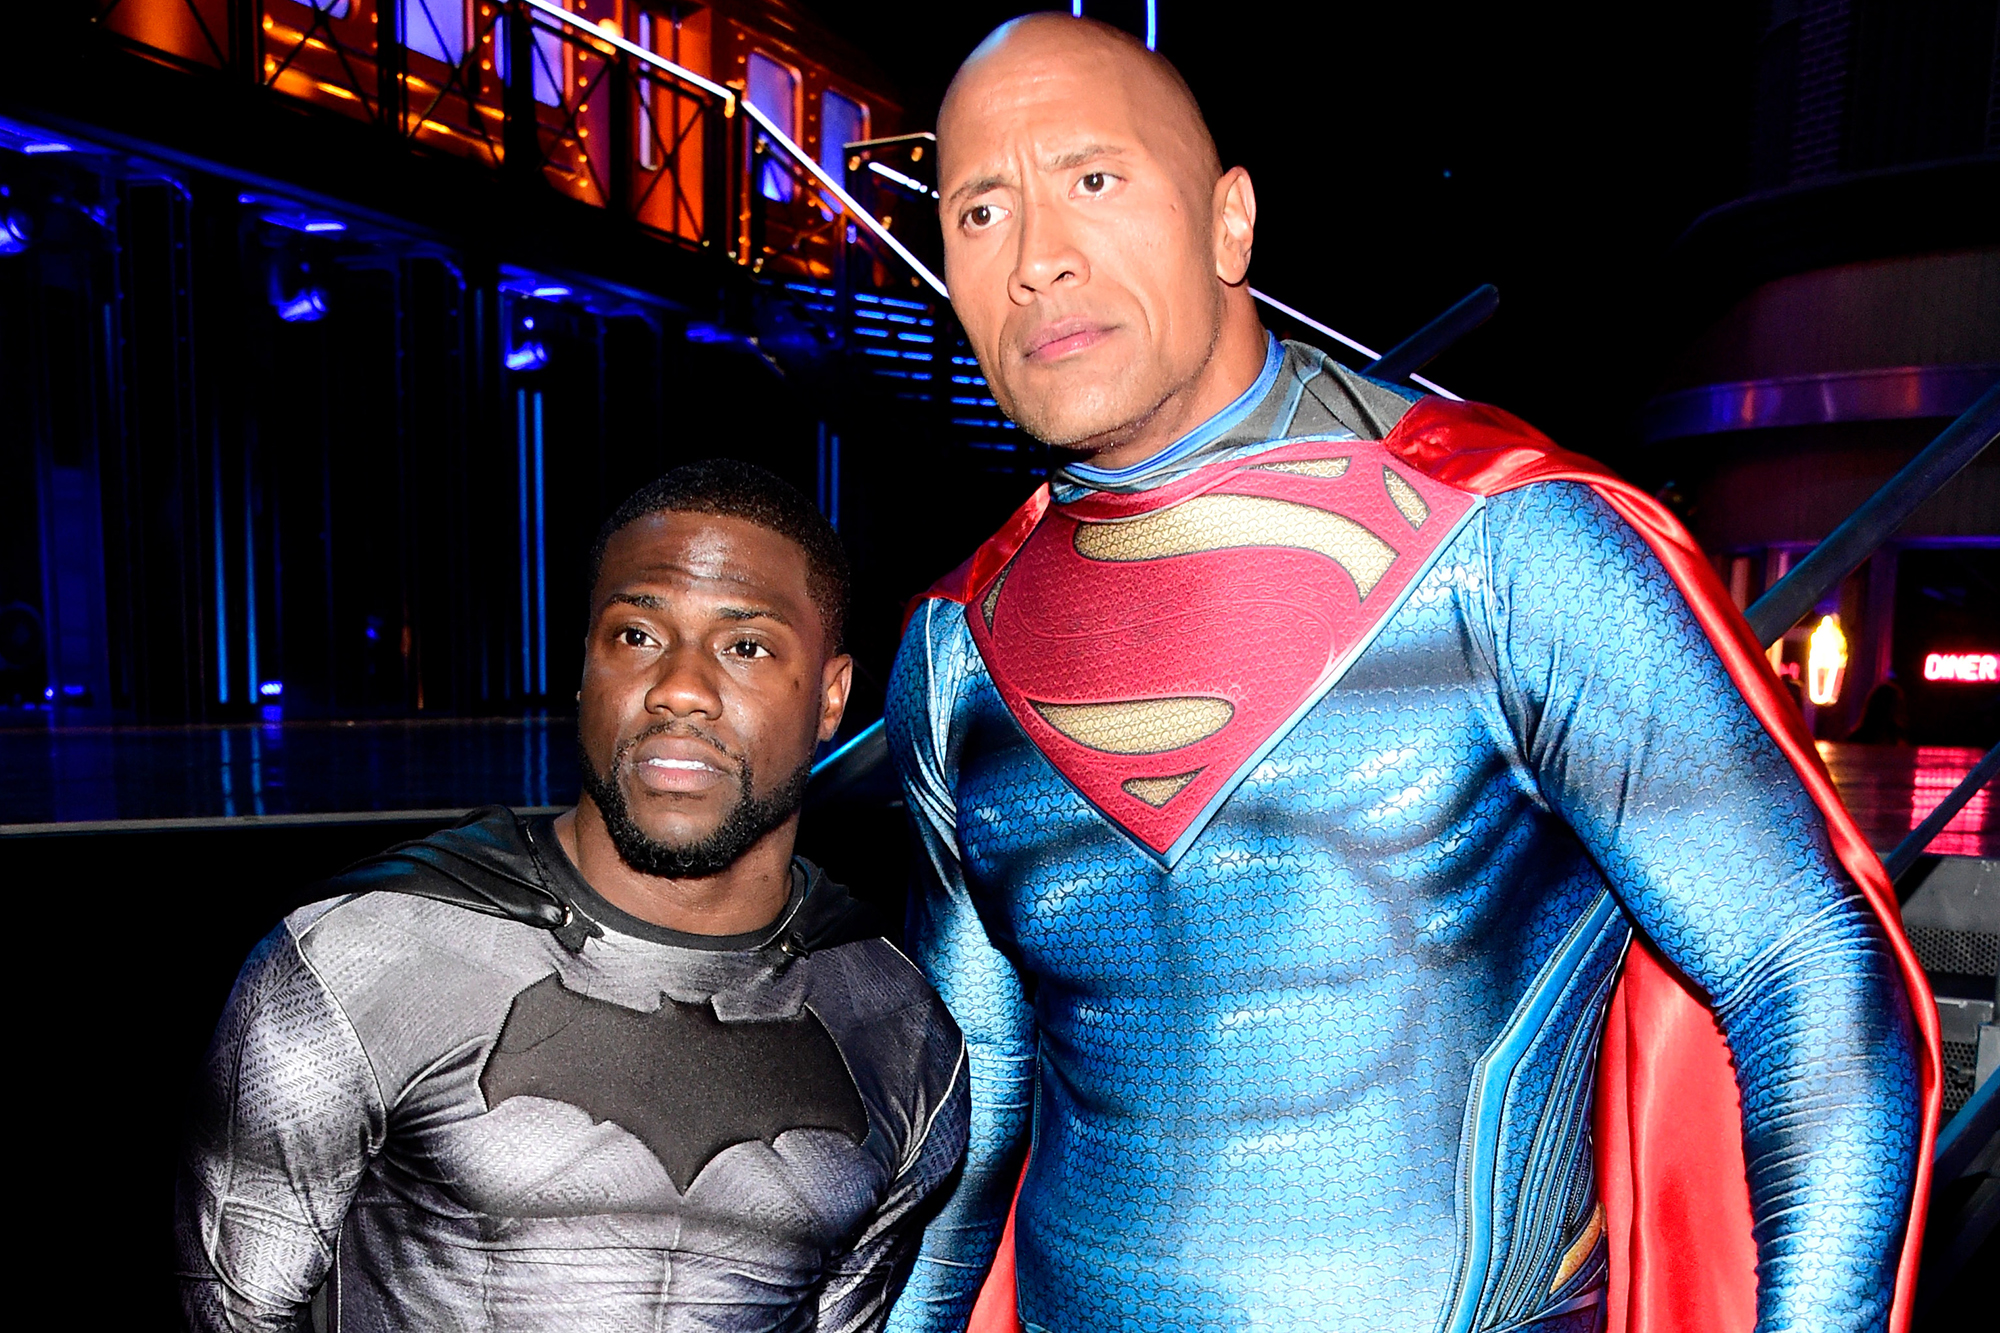 Kevin Hart and the Rock